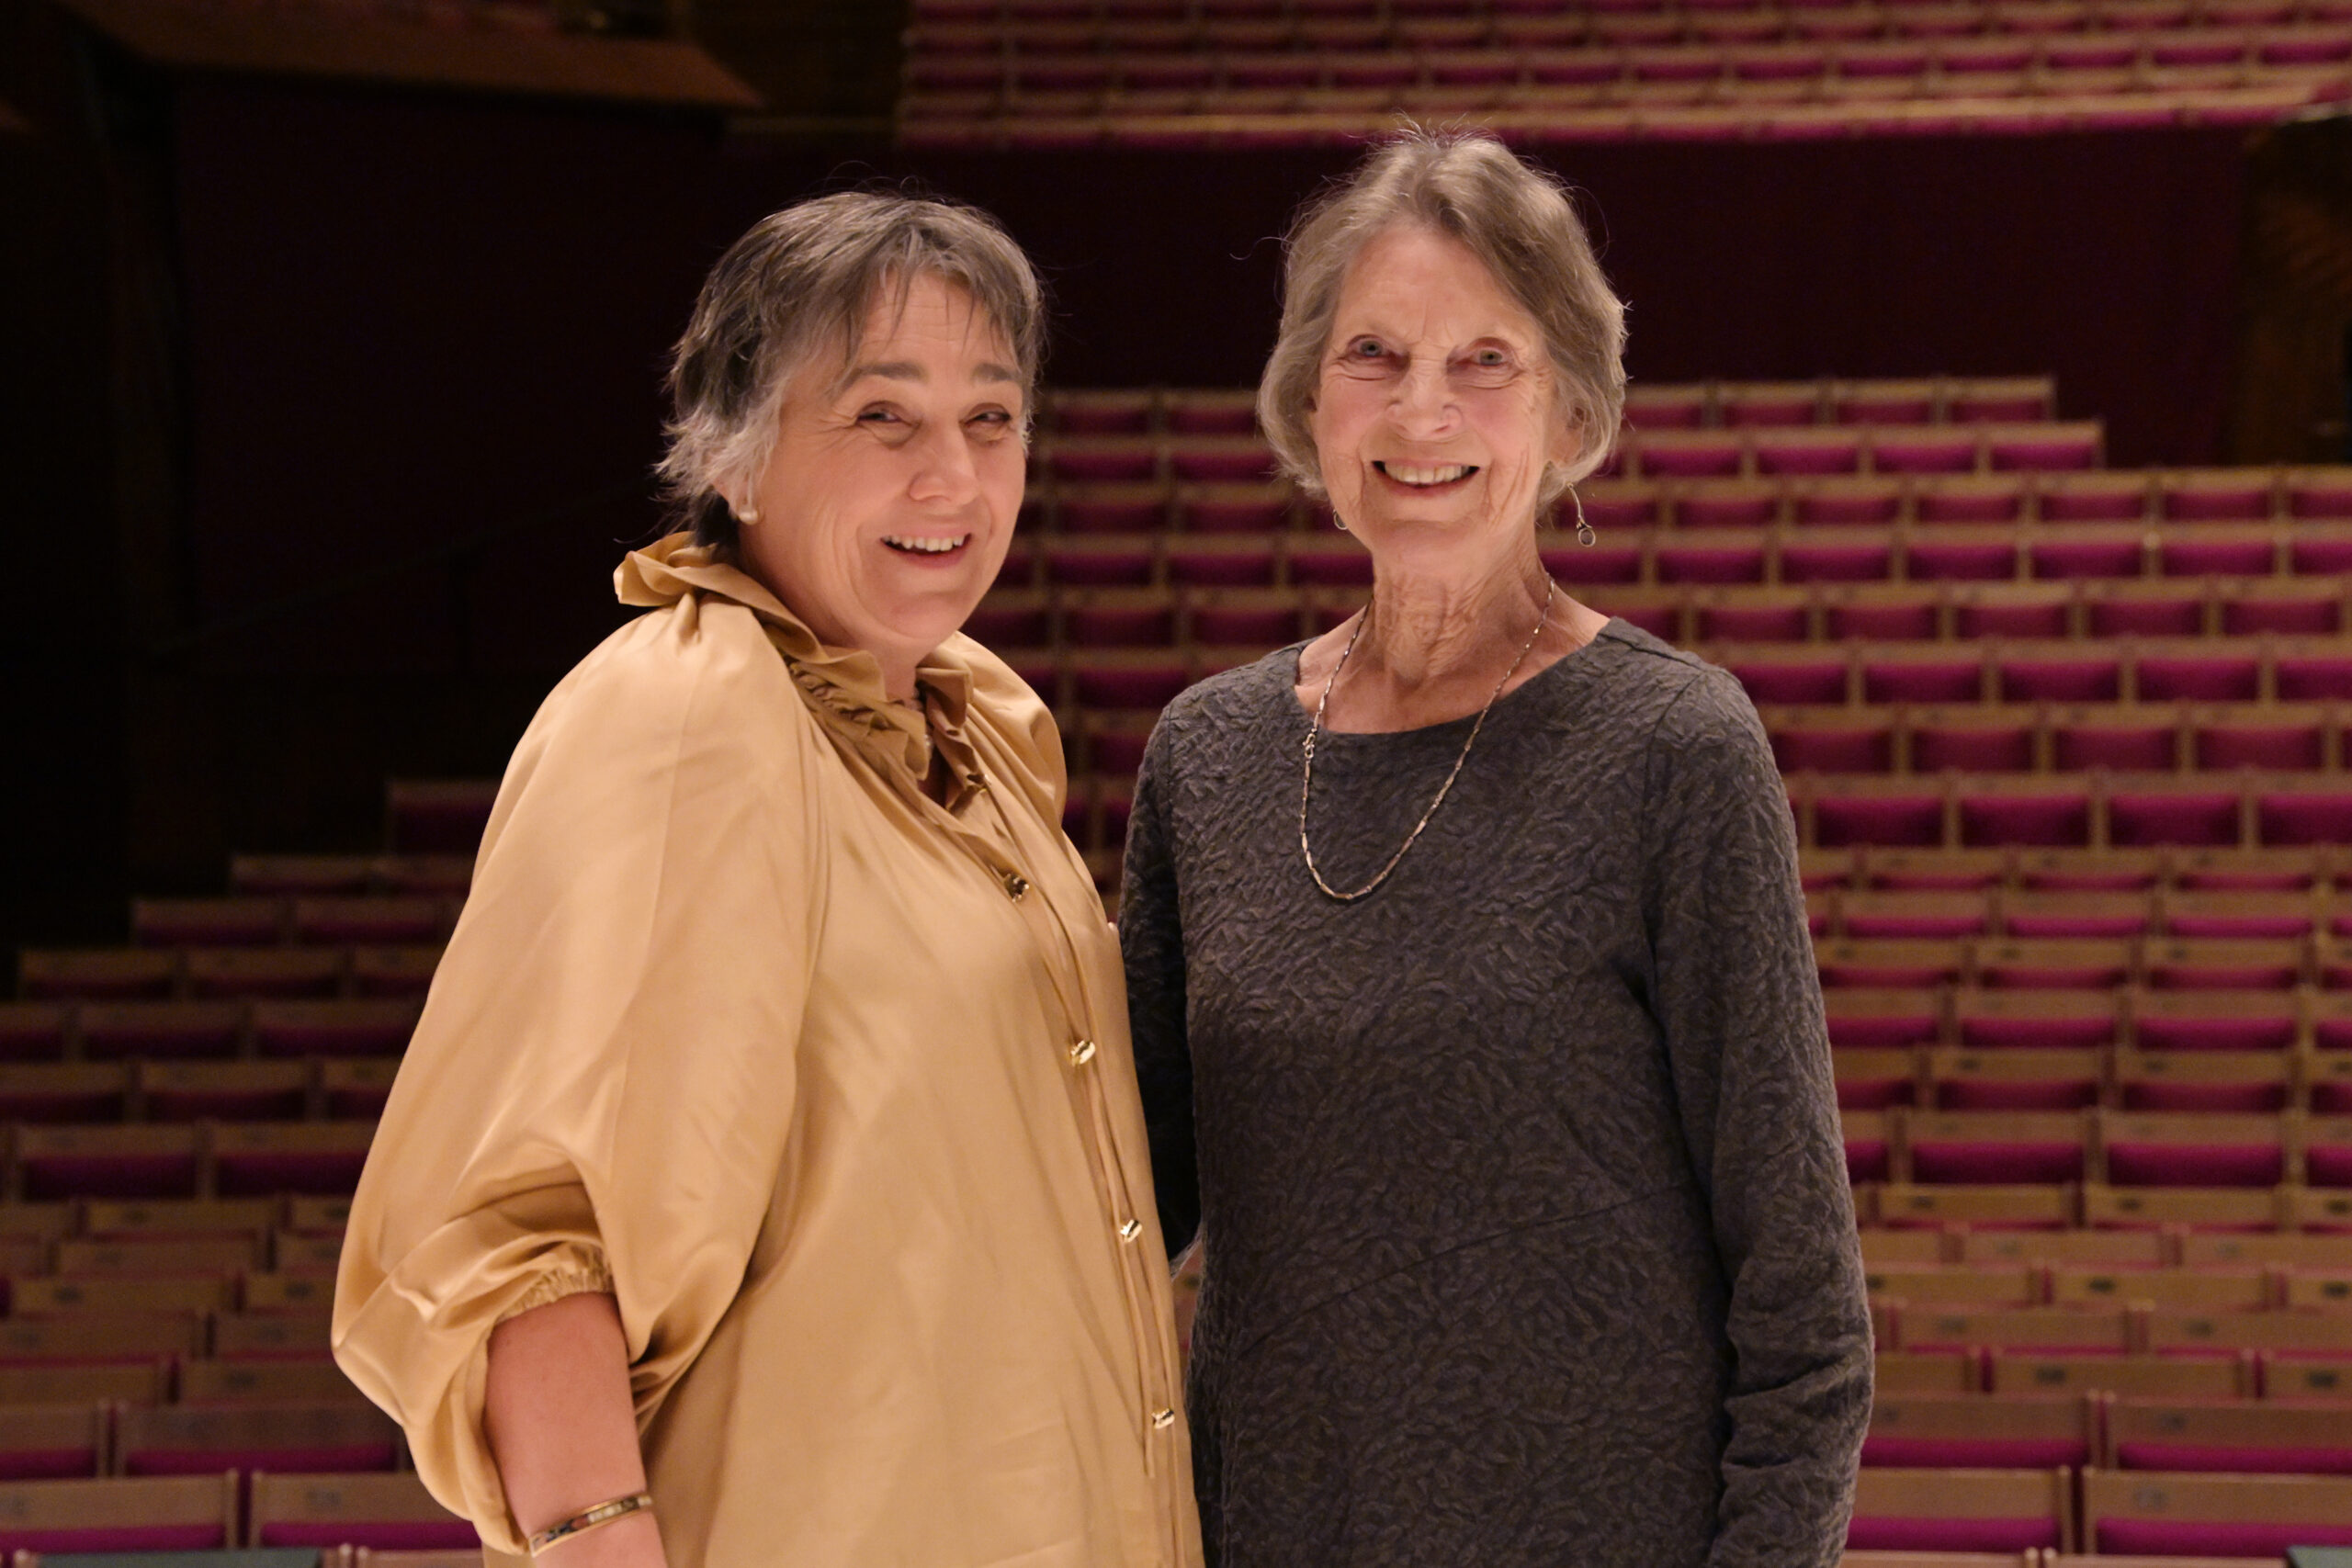 Sydney Eisteddfod General Manager (Annette Brown) and Marilyn Jones OBE